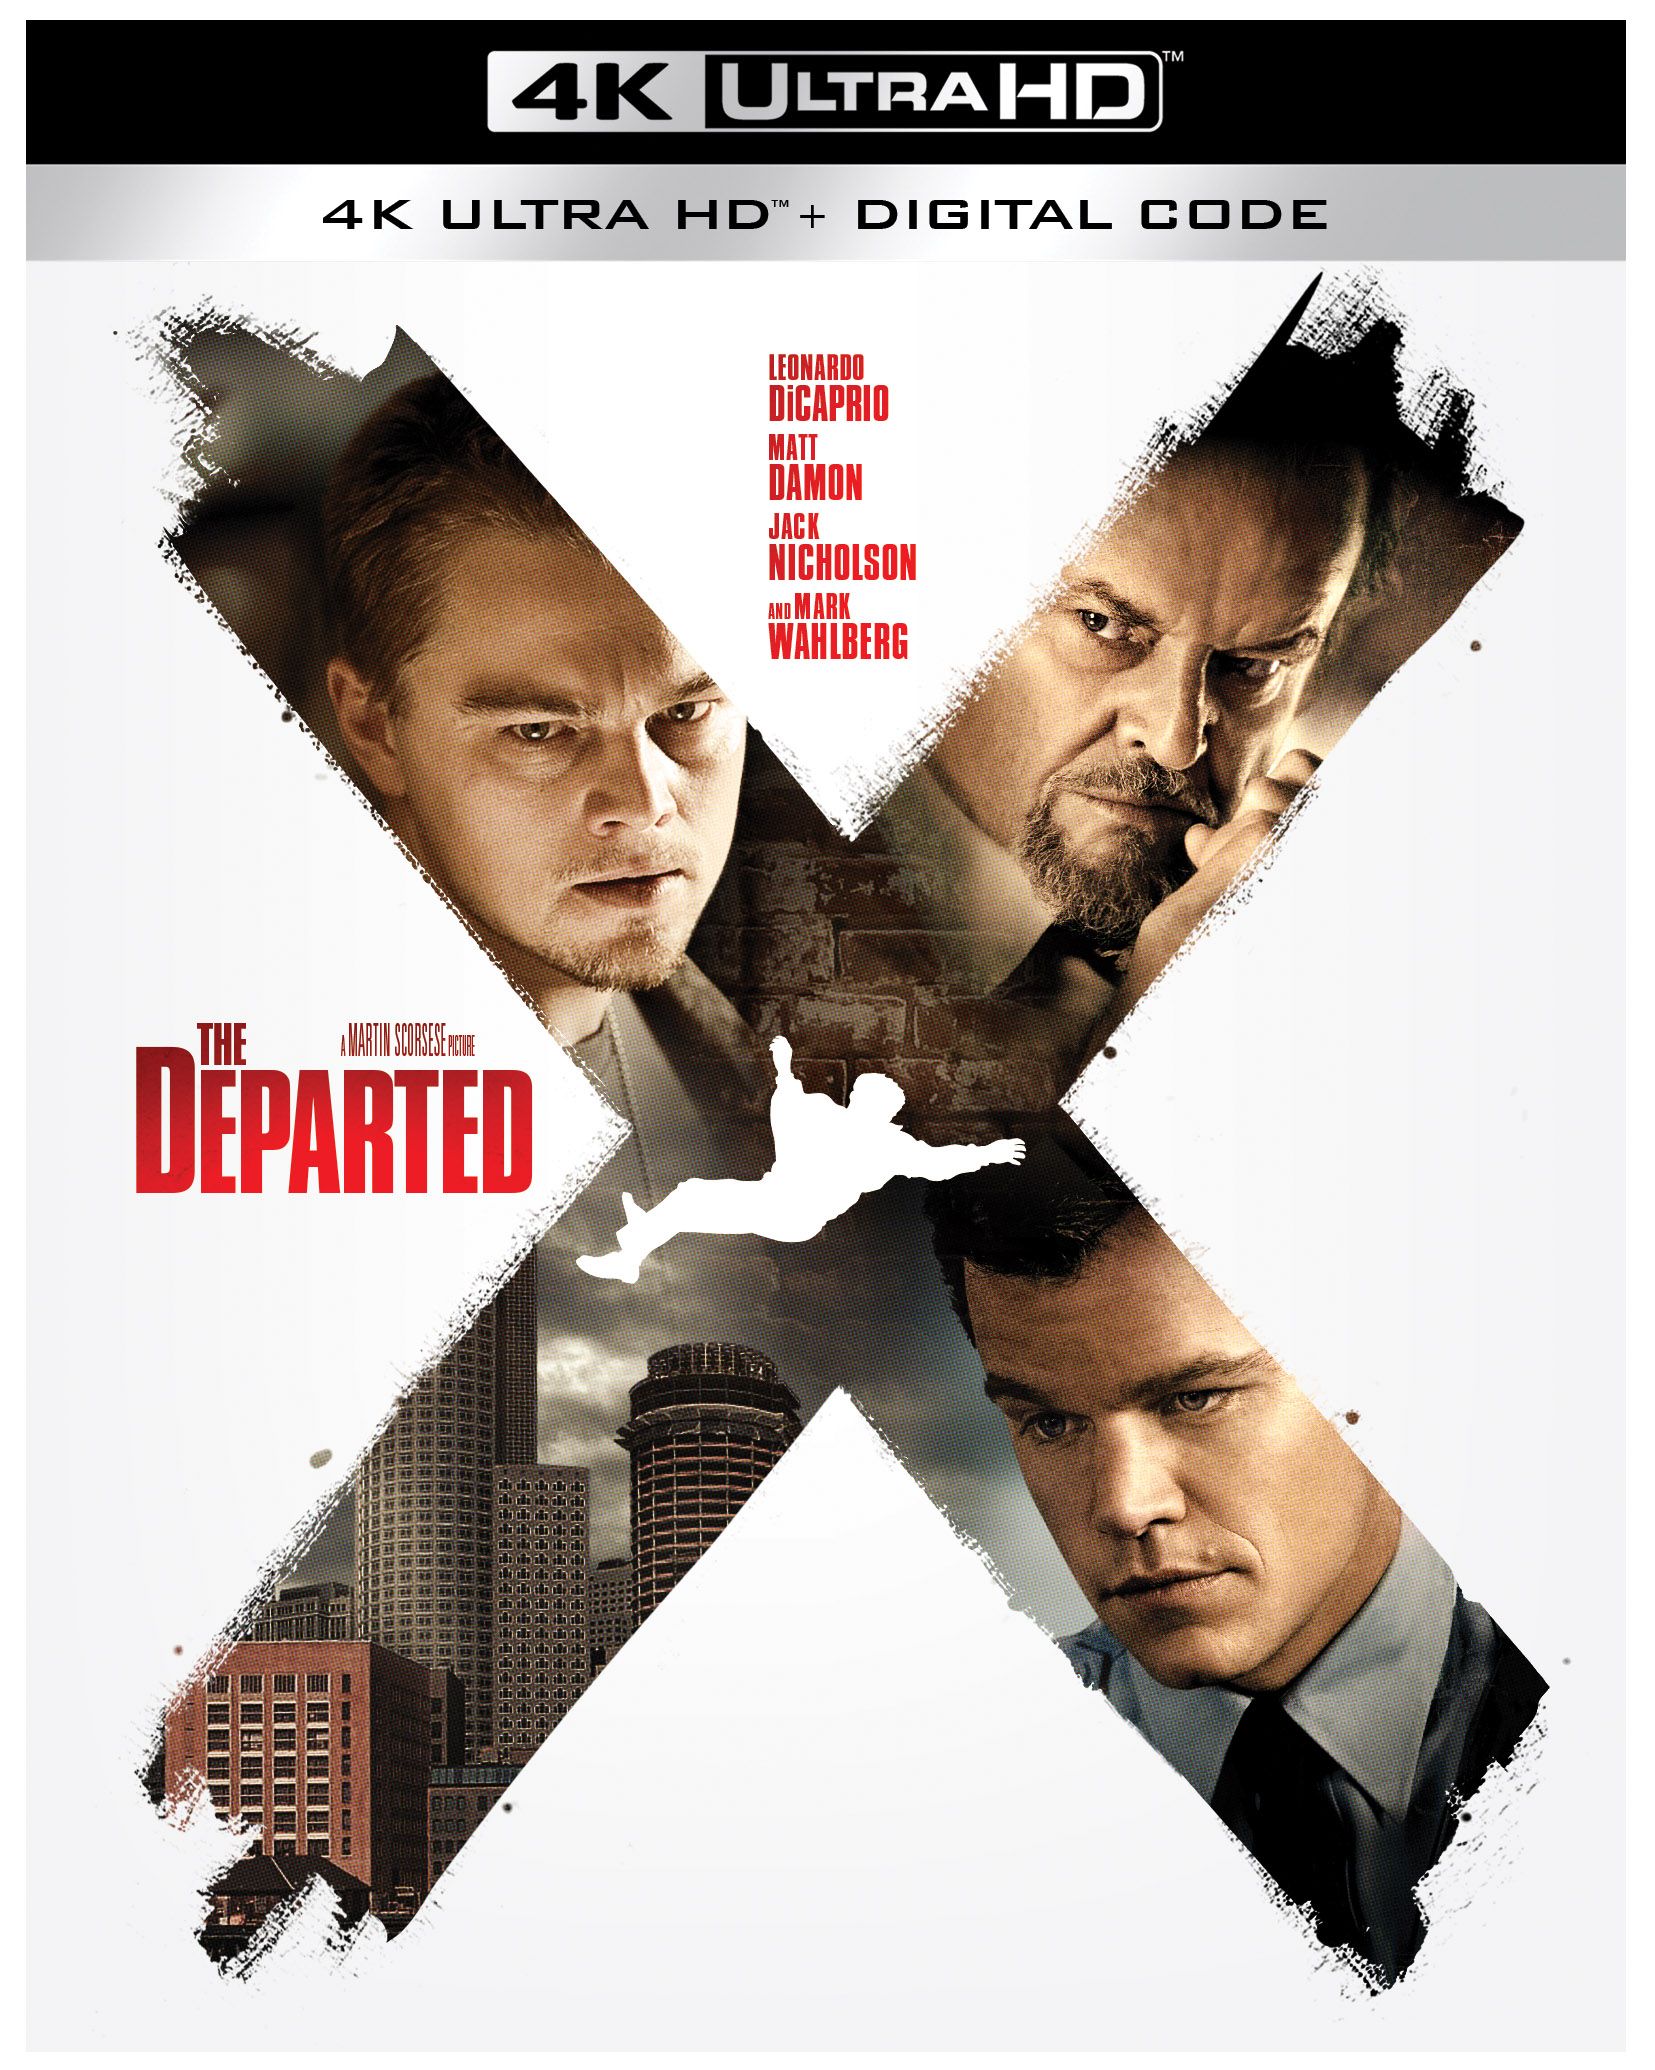 Martin Scorsese’s The Departed Looks Better Than Ever In 4K UHD Release Trailer